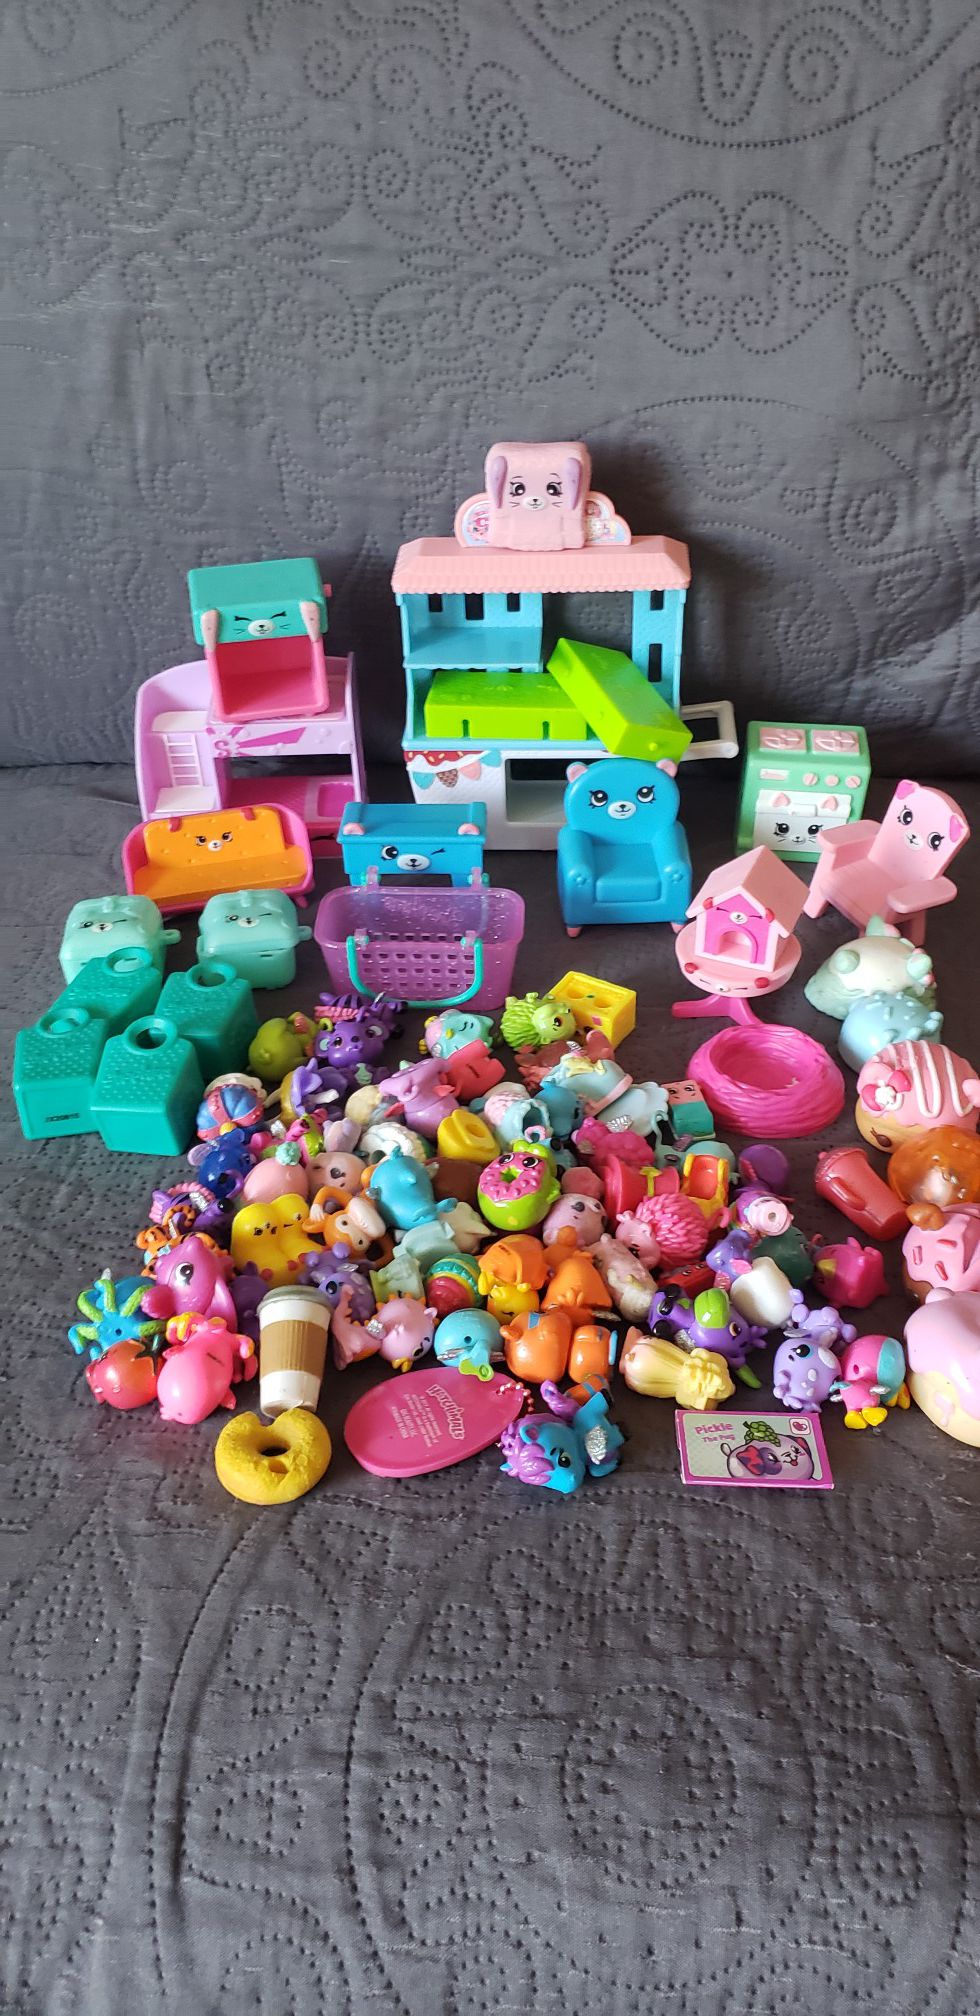 Shopkins and hatchmals